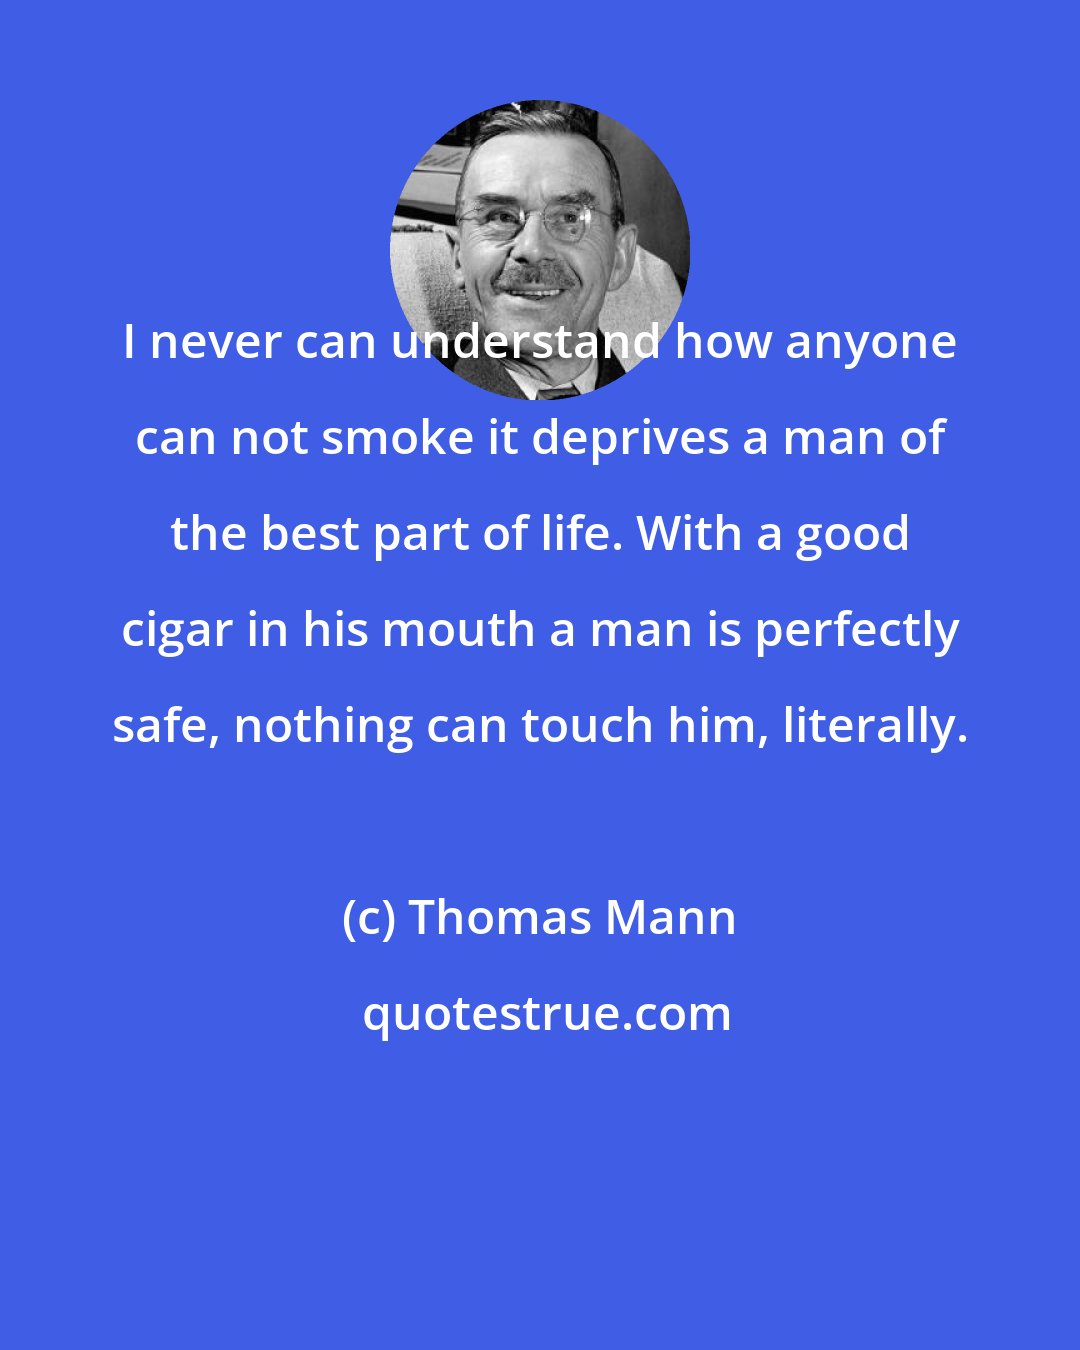 Thomas Mann: I never can understand how anyone can not smoke it deprives a man of the best part of life. With a good cigar in his mouth a man is perfectly safe, nothing can touch him, literally.